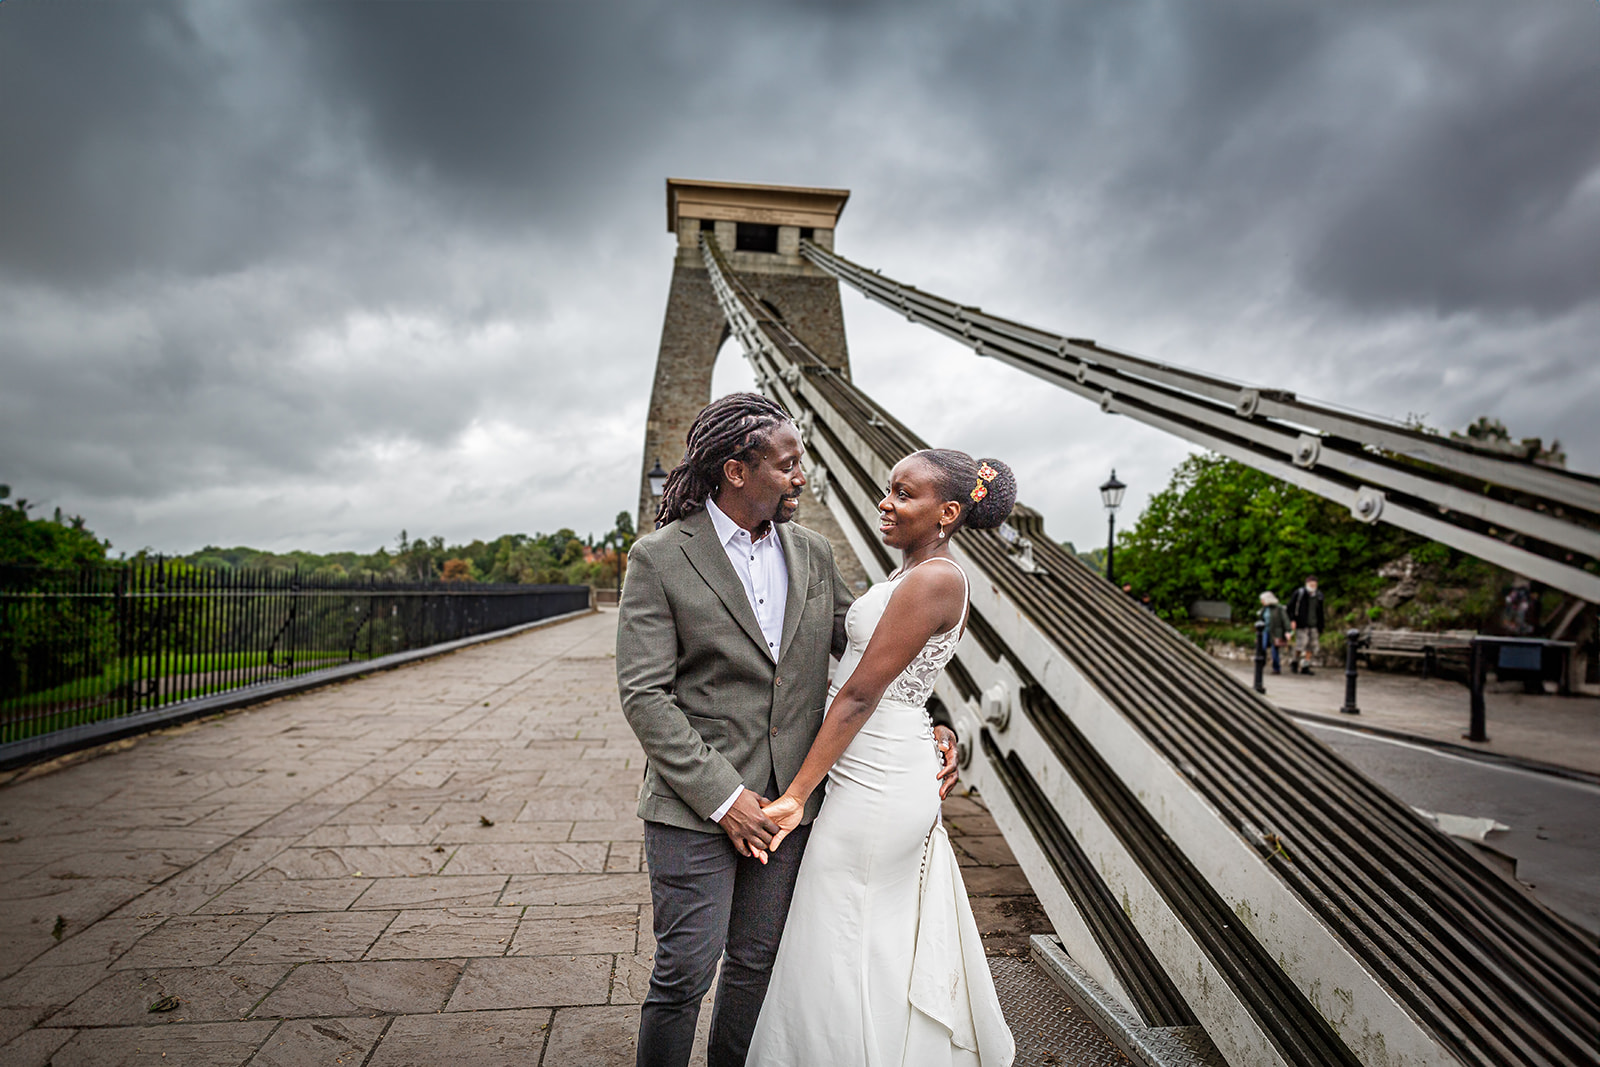 Bride and groom photographed on Clifton Suspension Bridge.